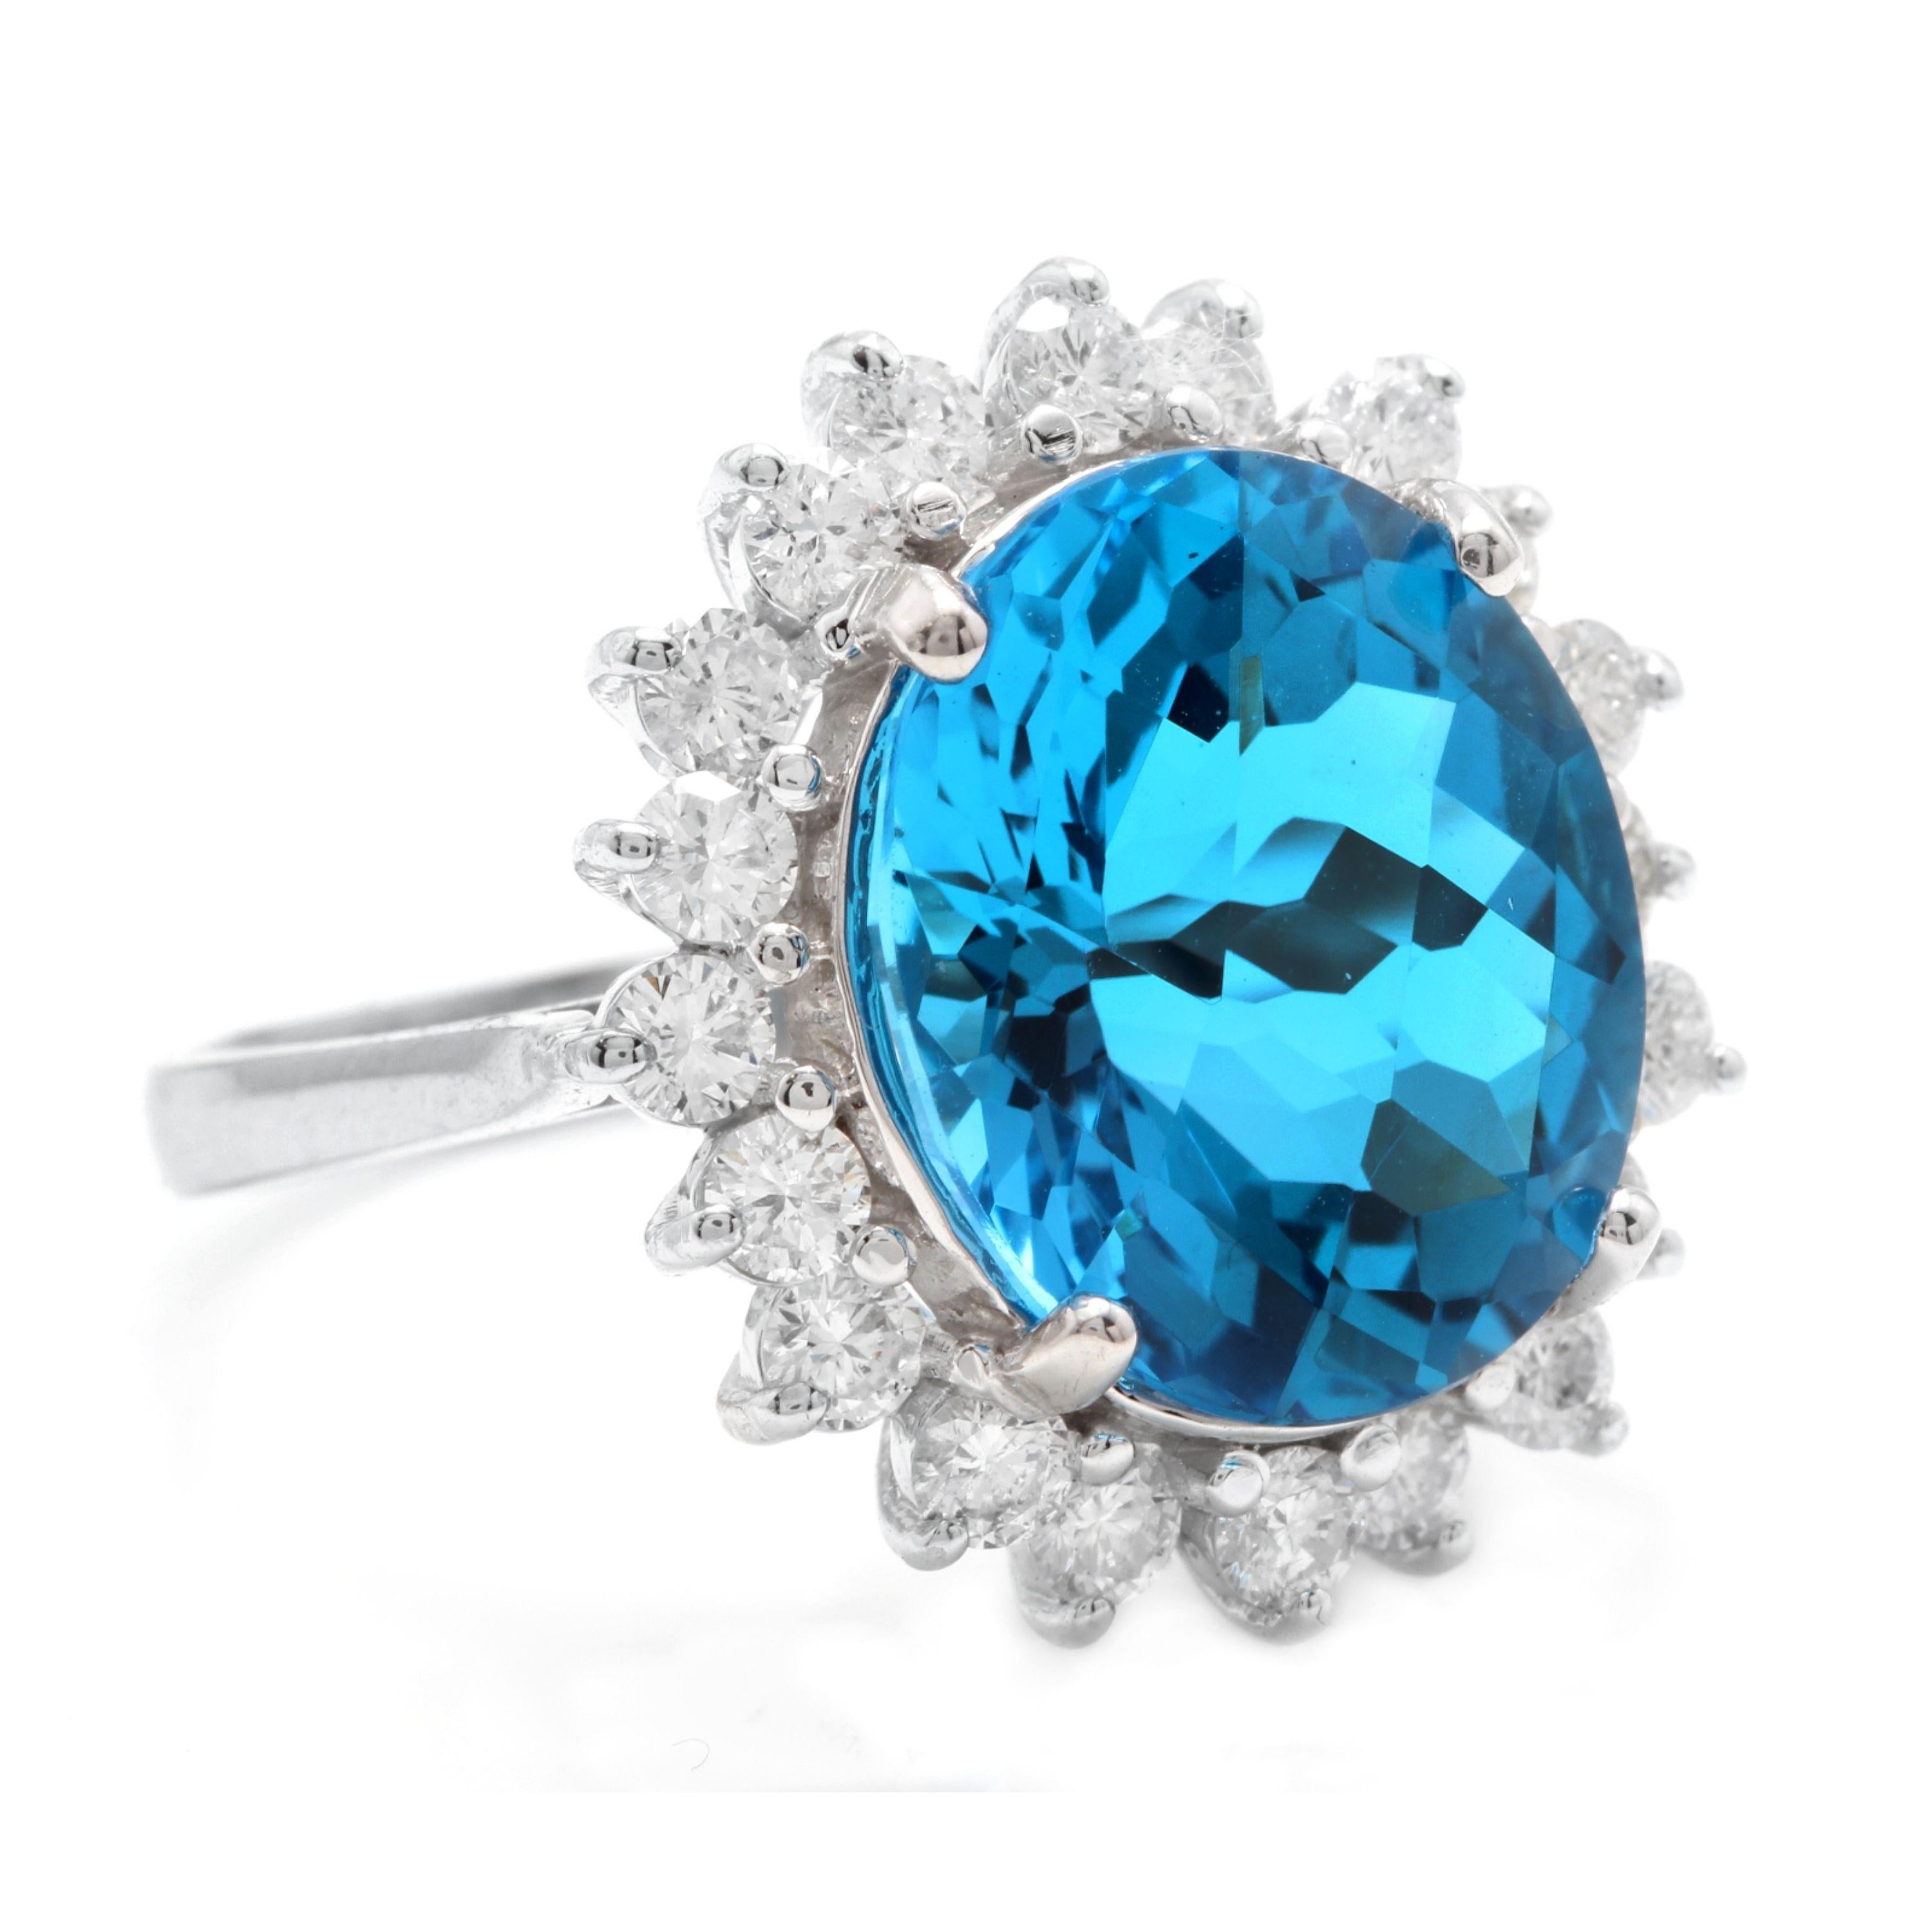 11.05 Carats Impressive Natural Swiss Blue Topaz and Diamond 14K Solid White Gold Ring

Total Topaz Weight is: Approx. 10.00 Carats

Topaz Treatment: Heating

Topaz Measures: Approx. 14.00 x 12.00mm

Natural Round Diamonds Weight: Approx. 1.05